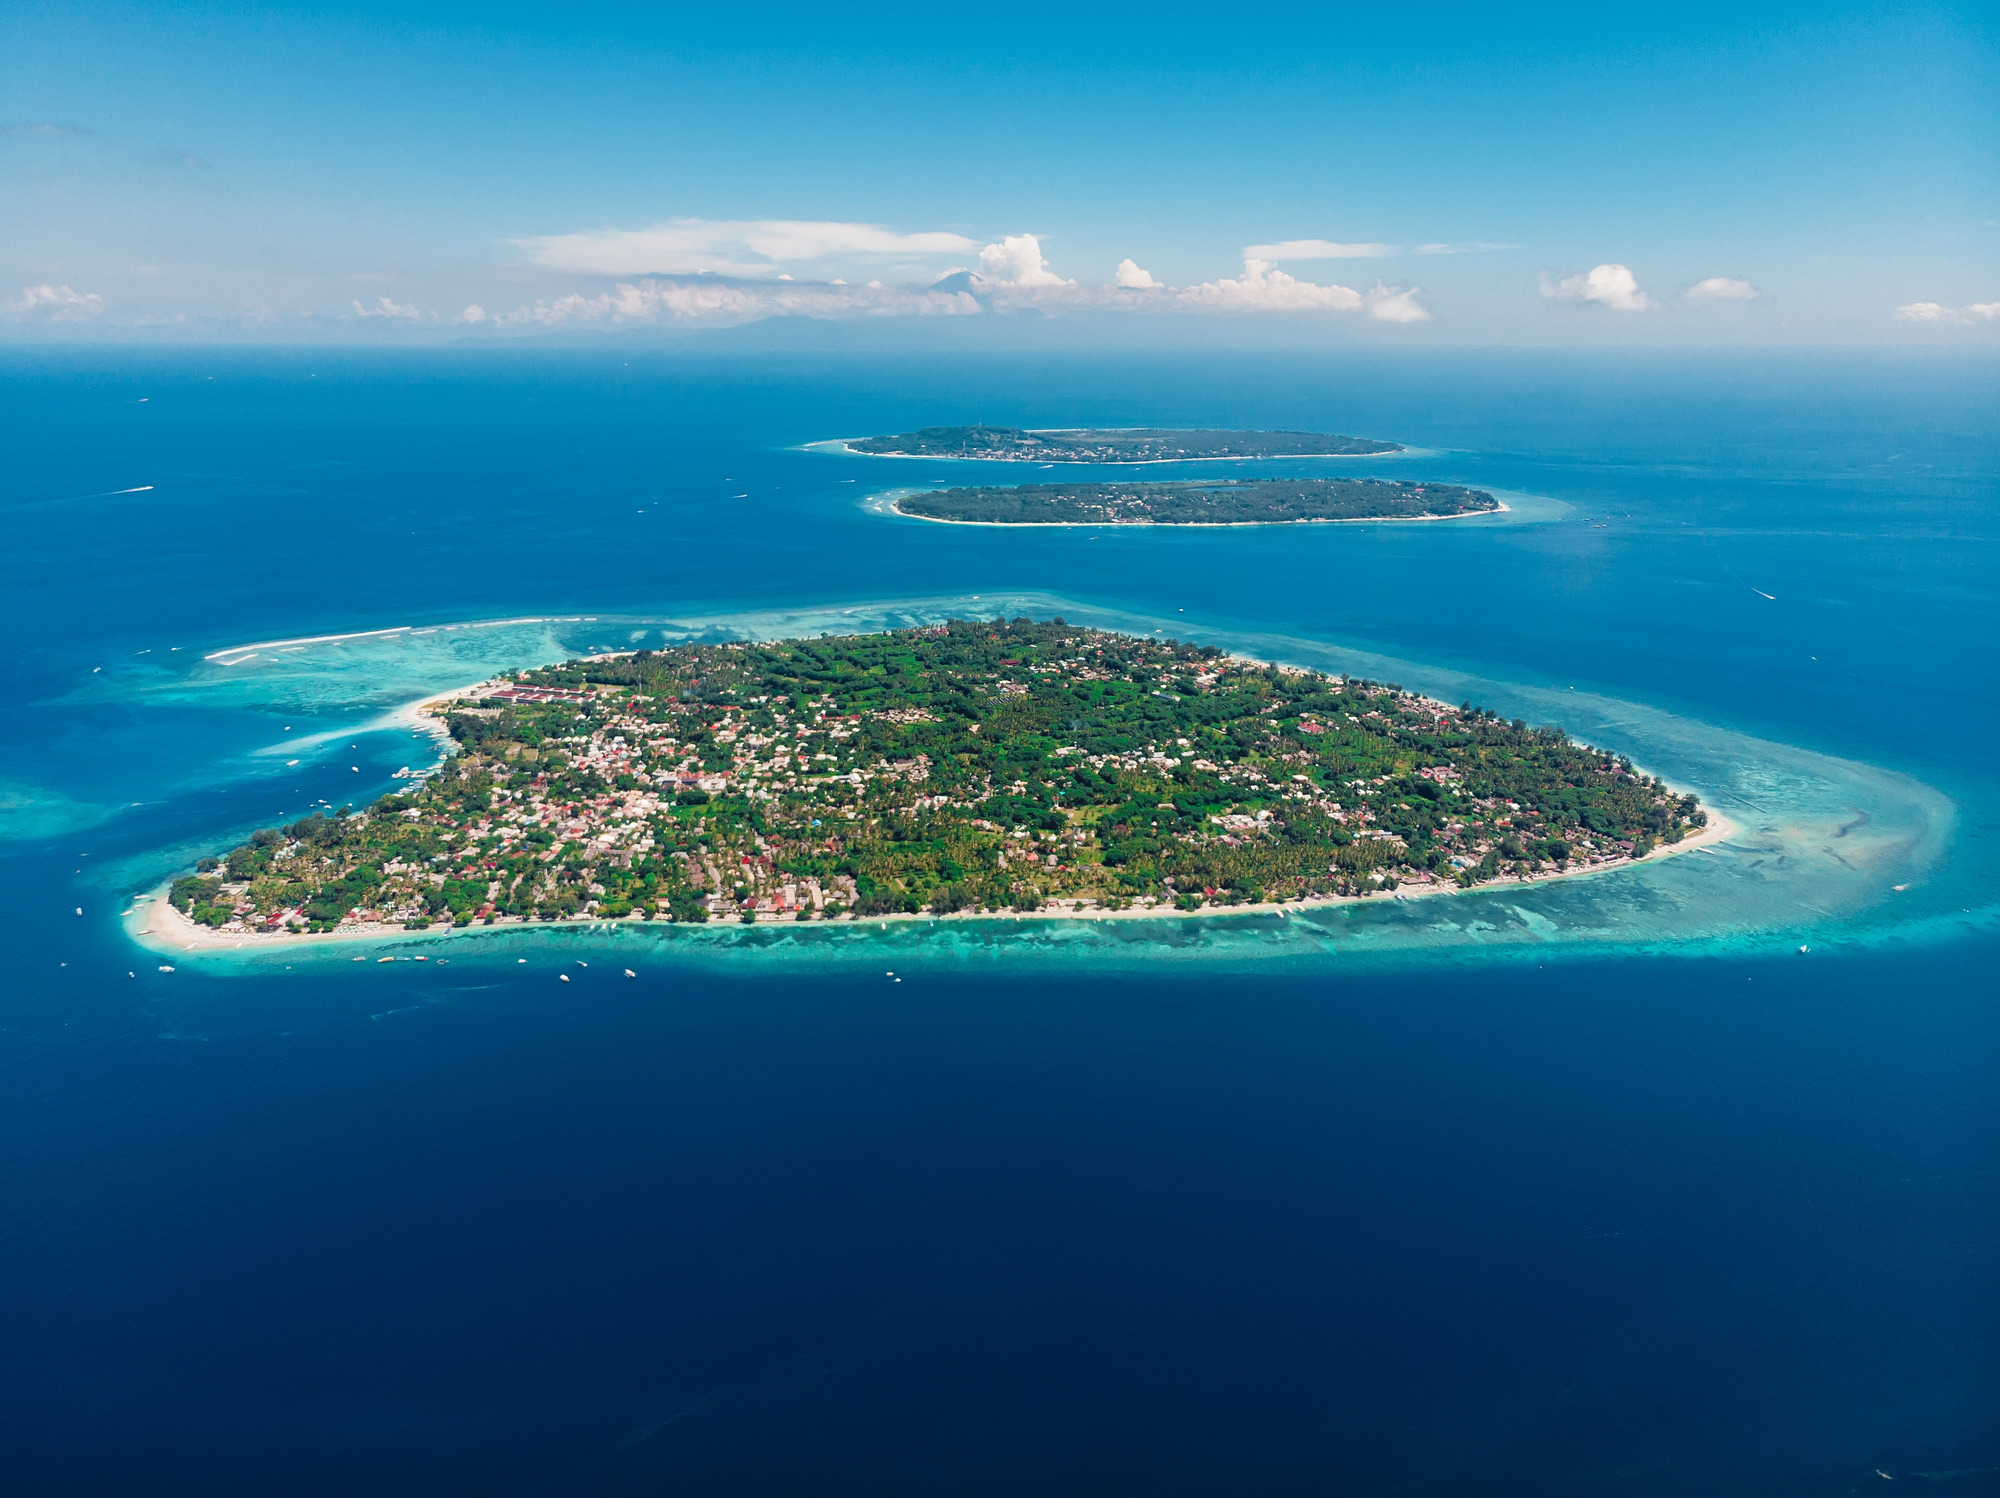 Aerial view with Gili islands and ocean, drone shot.